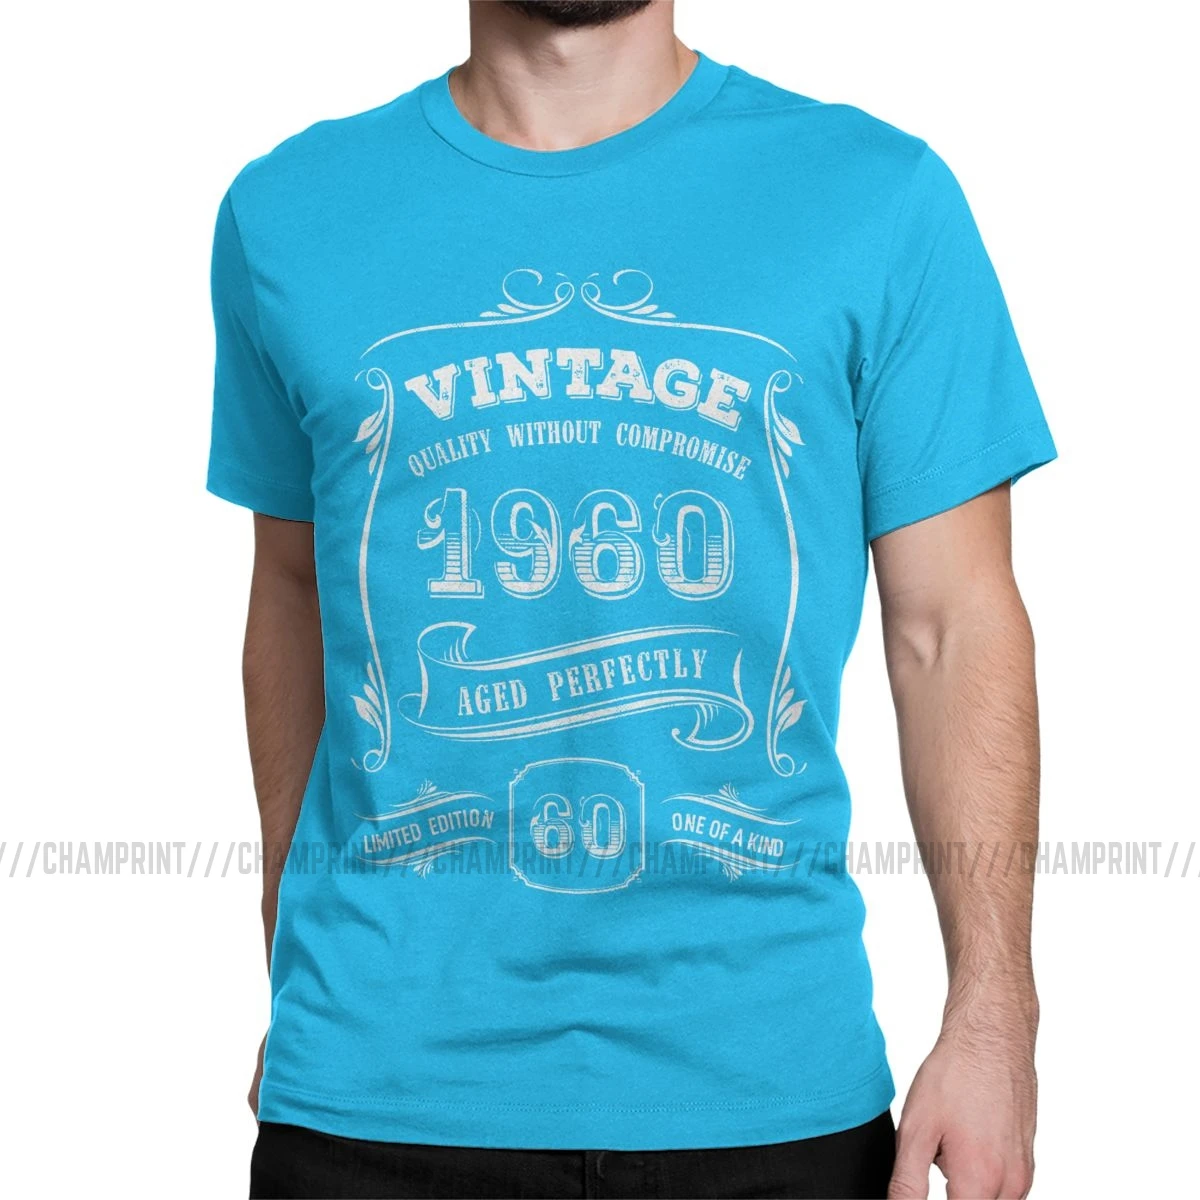 Unisex T-Shirt 60th Birthday Gift Gold Vintage 1960 Aged Perfectly Shirts For Men Women Cool T Shirts 